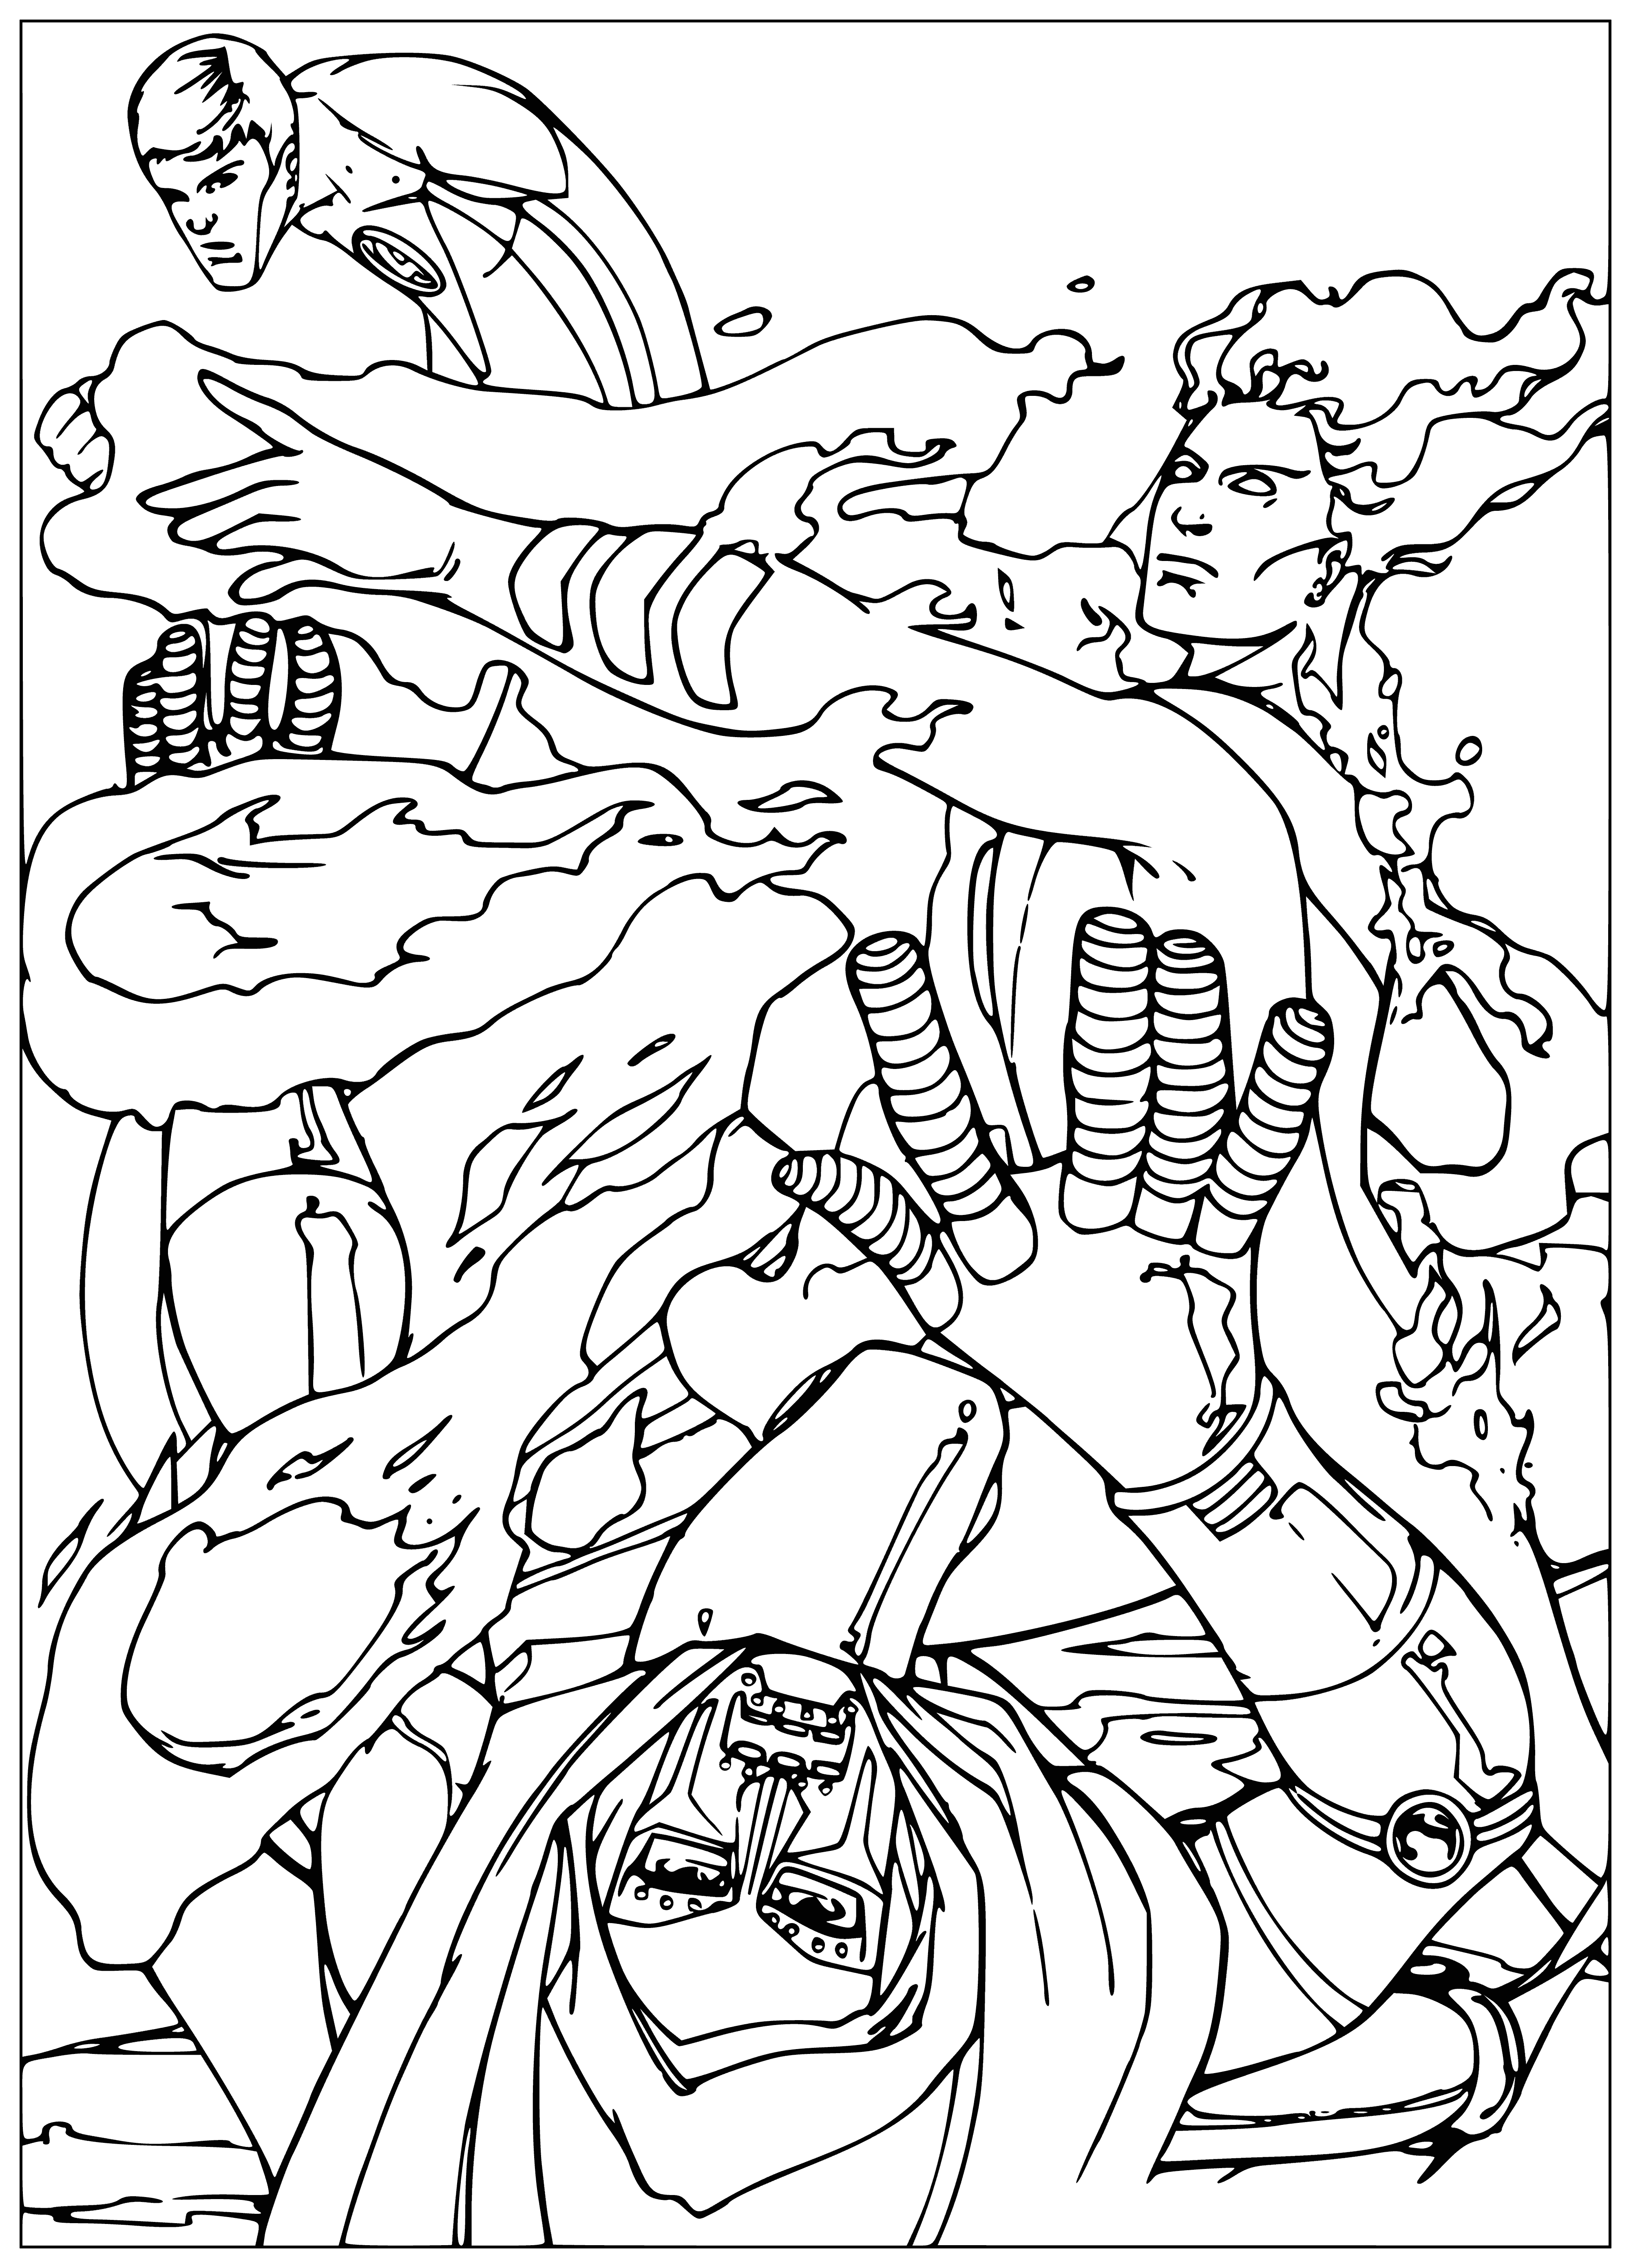 coloring page: Burning figure in center, with 3 others: woman, rock man, green-skinned man shooting energy from eyes. #coloringpage